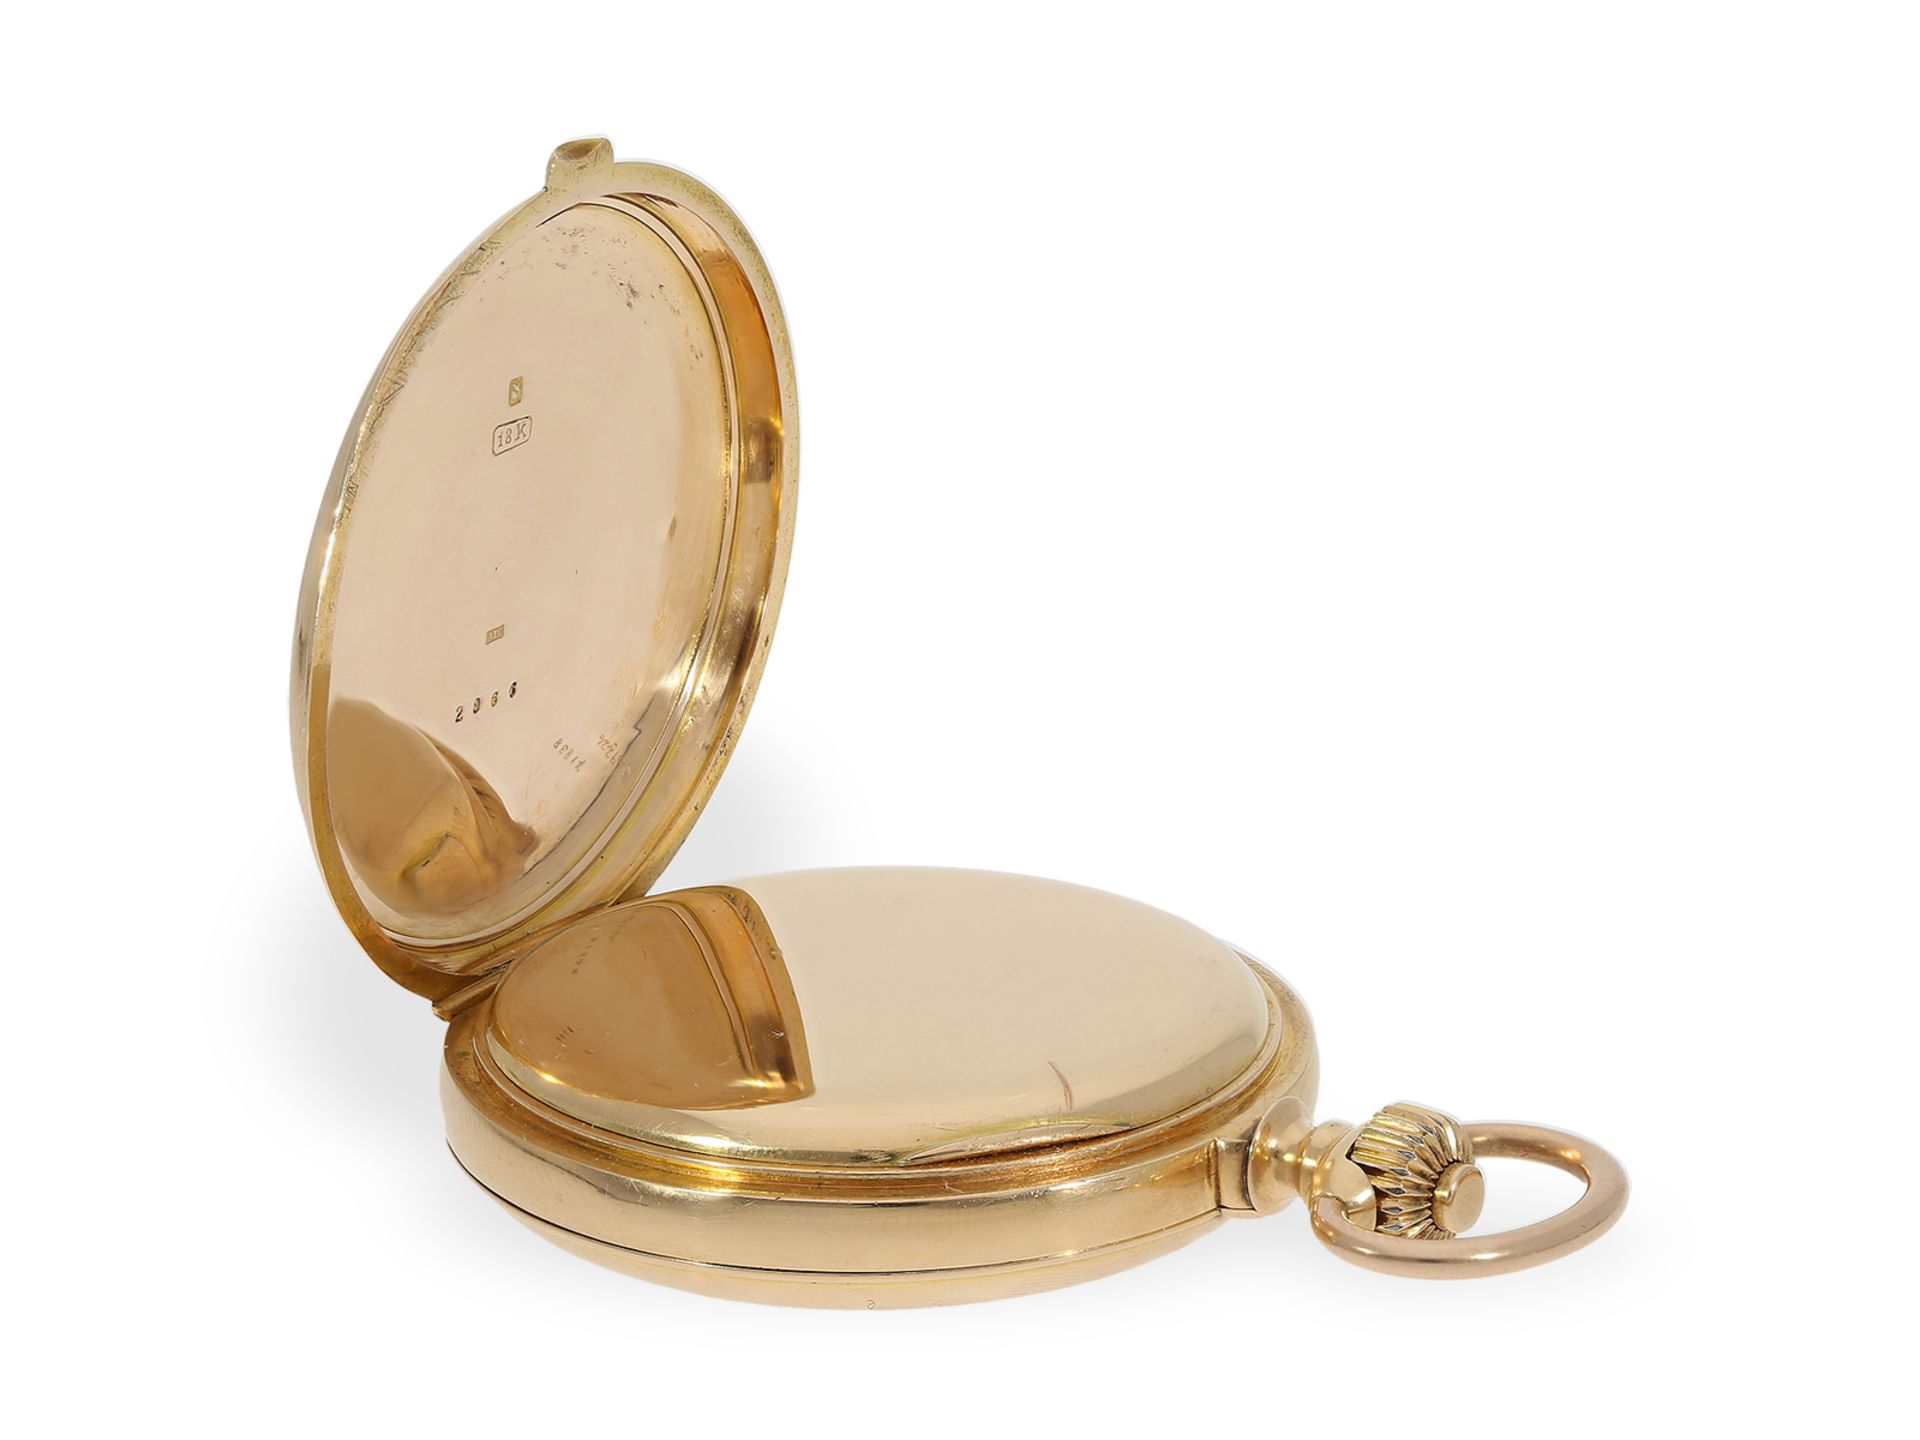 Pocket watch: very fine gold hunting case watch with repeater, probably Audemars Freres, ca. 1880 - Image 3 of 7